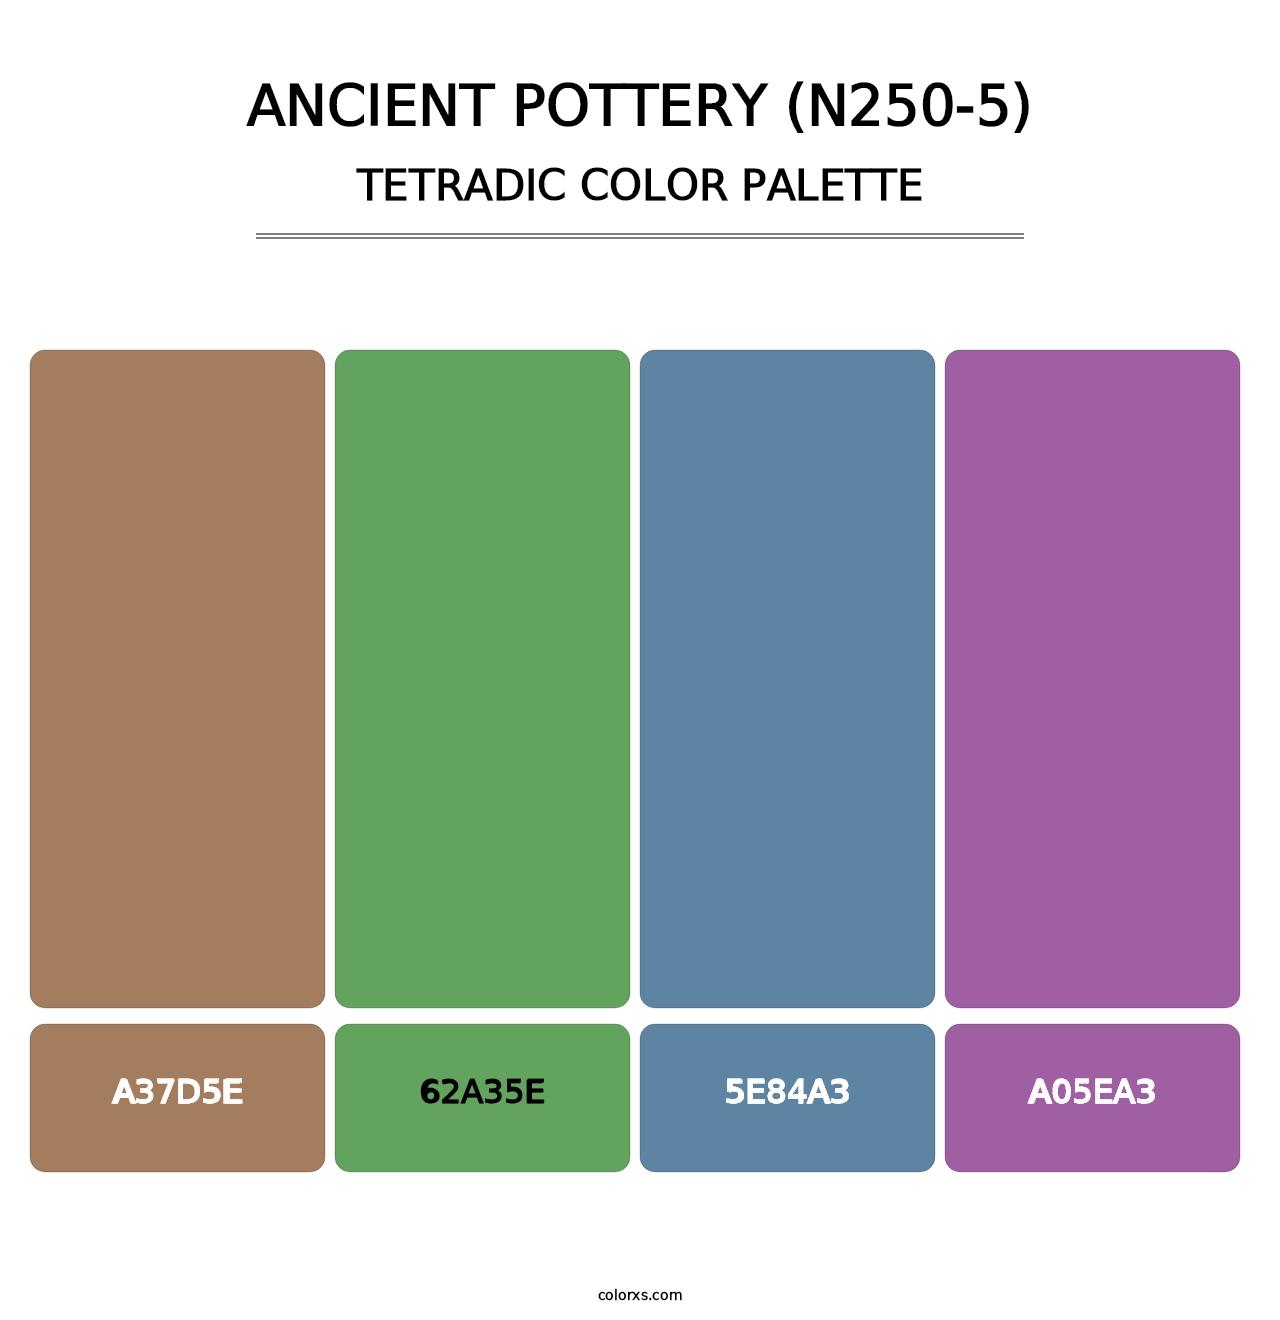 Ancient Pottery (N250-5) - Tetradic Color Palette